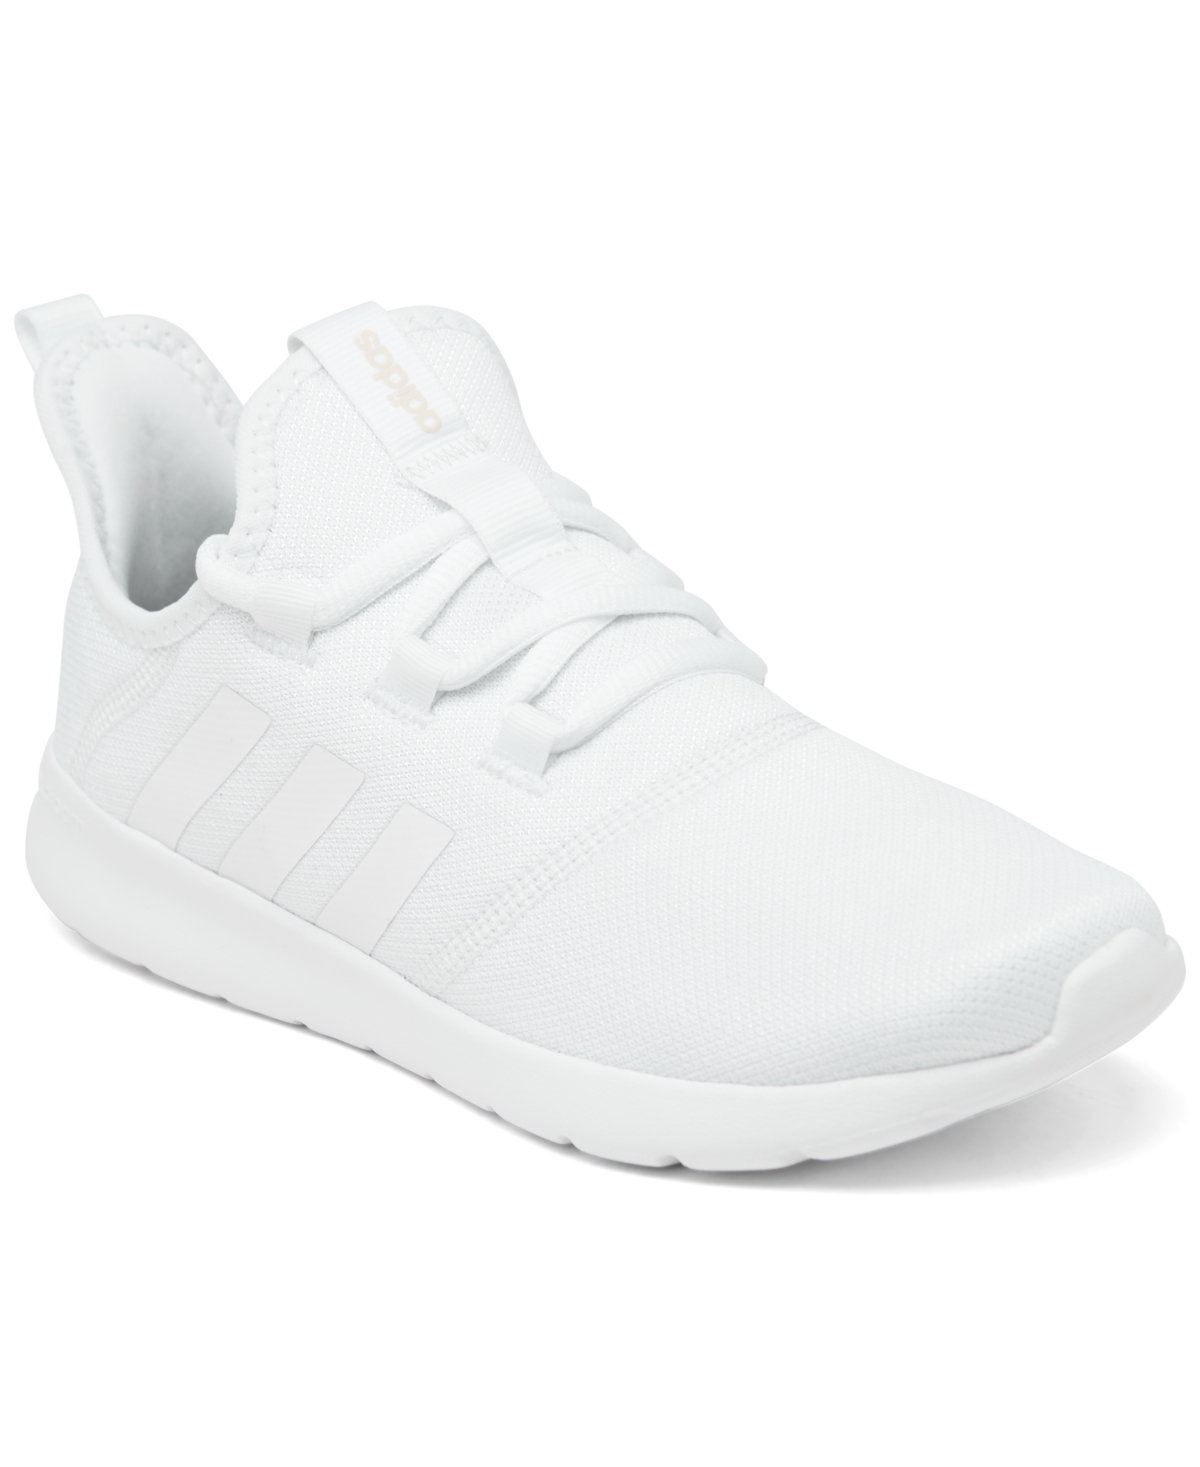 Adidas Originals Women's Cloud Foam Pure 2.0 Casual Sneakers From Finish Line In White